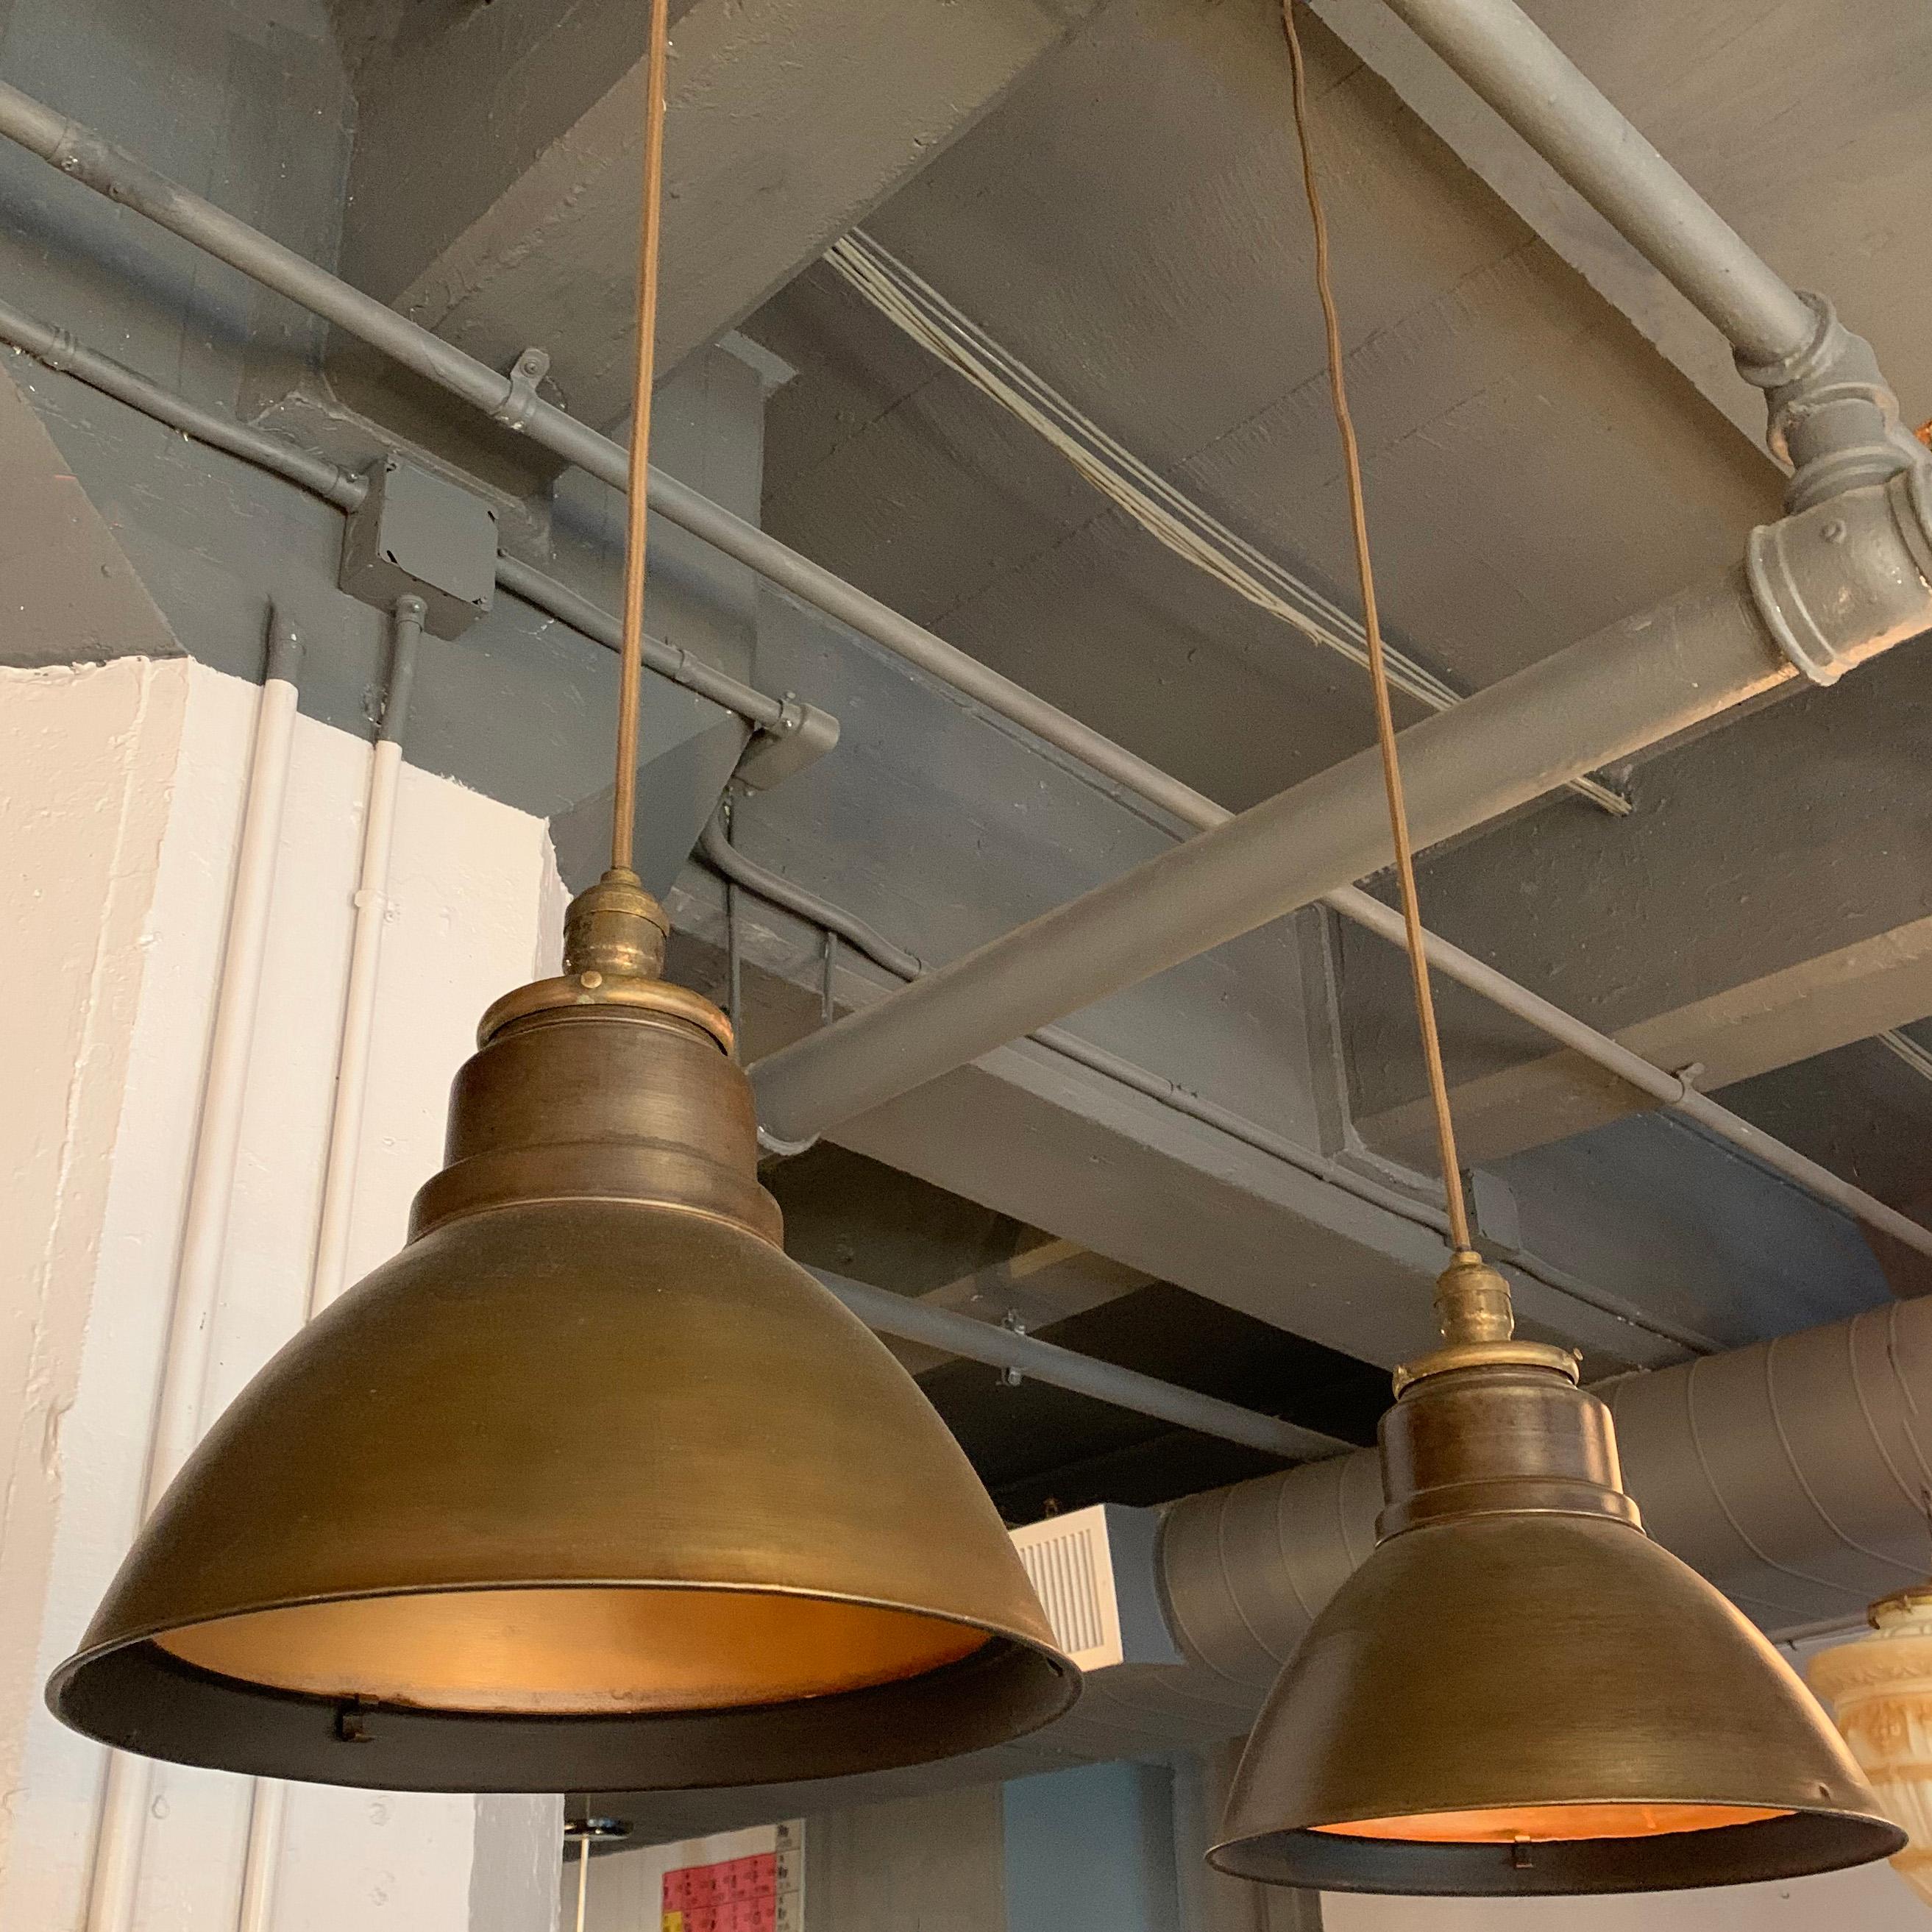 Pair of industrial factory pendants lights feature steel dome shades in a gunmetal exterior finish with reflective brass-toned interiors. The pendants are newly wired with 44 inches of brown cloth cord to accept medium socket bulbs up to 200 watts.